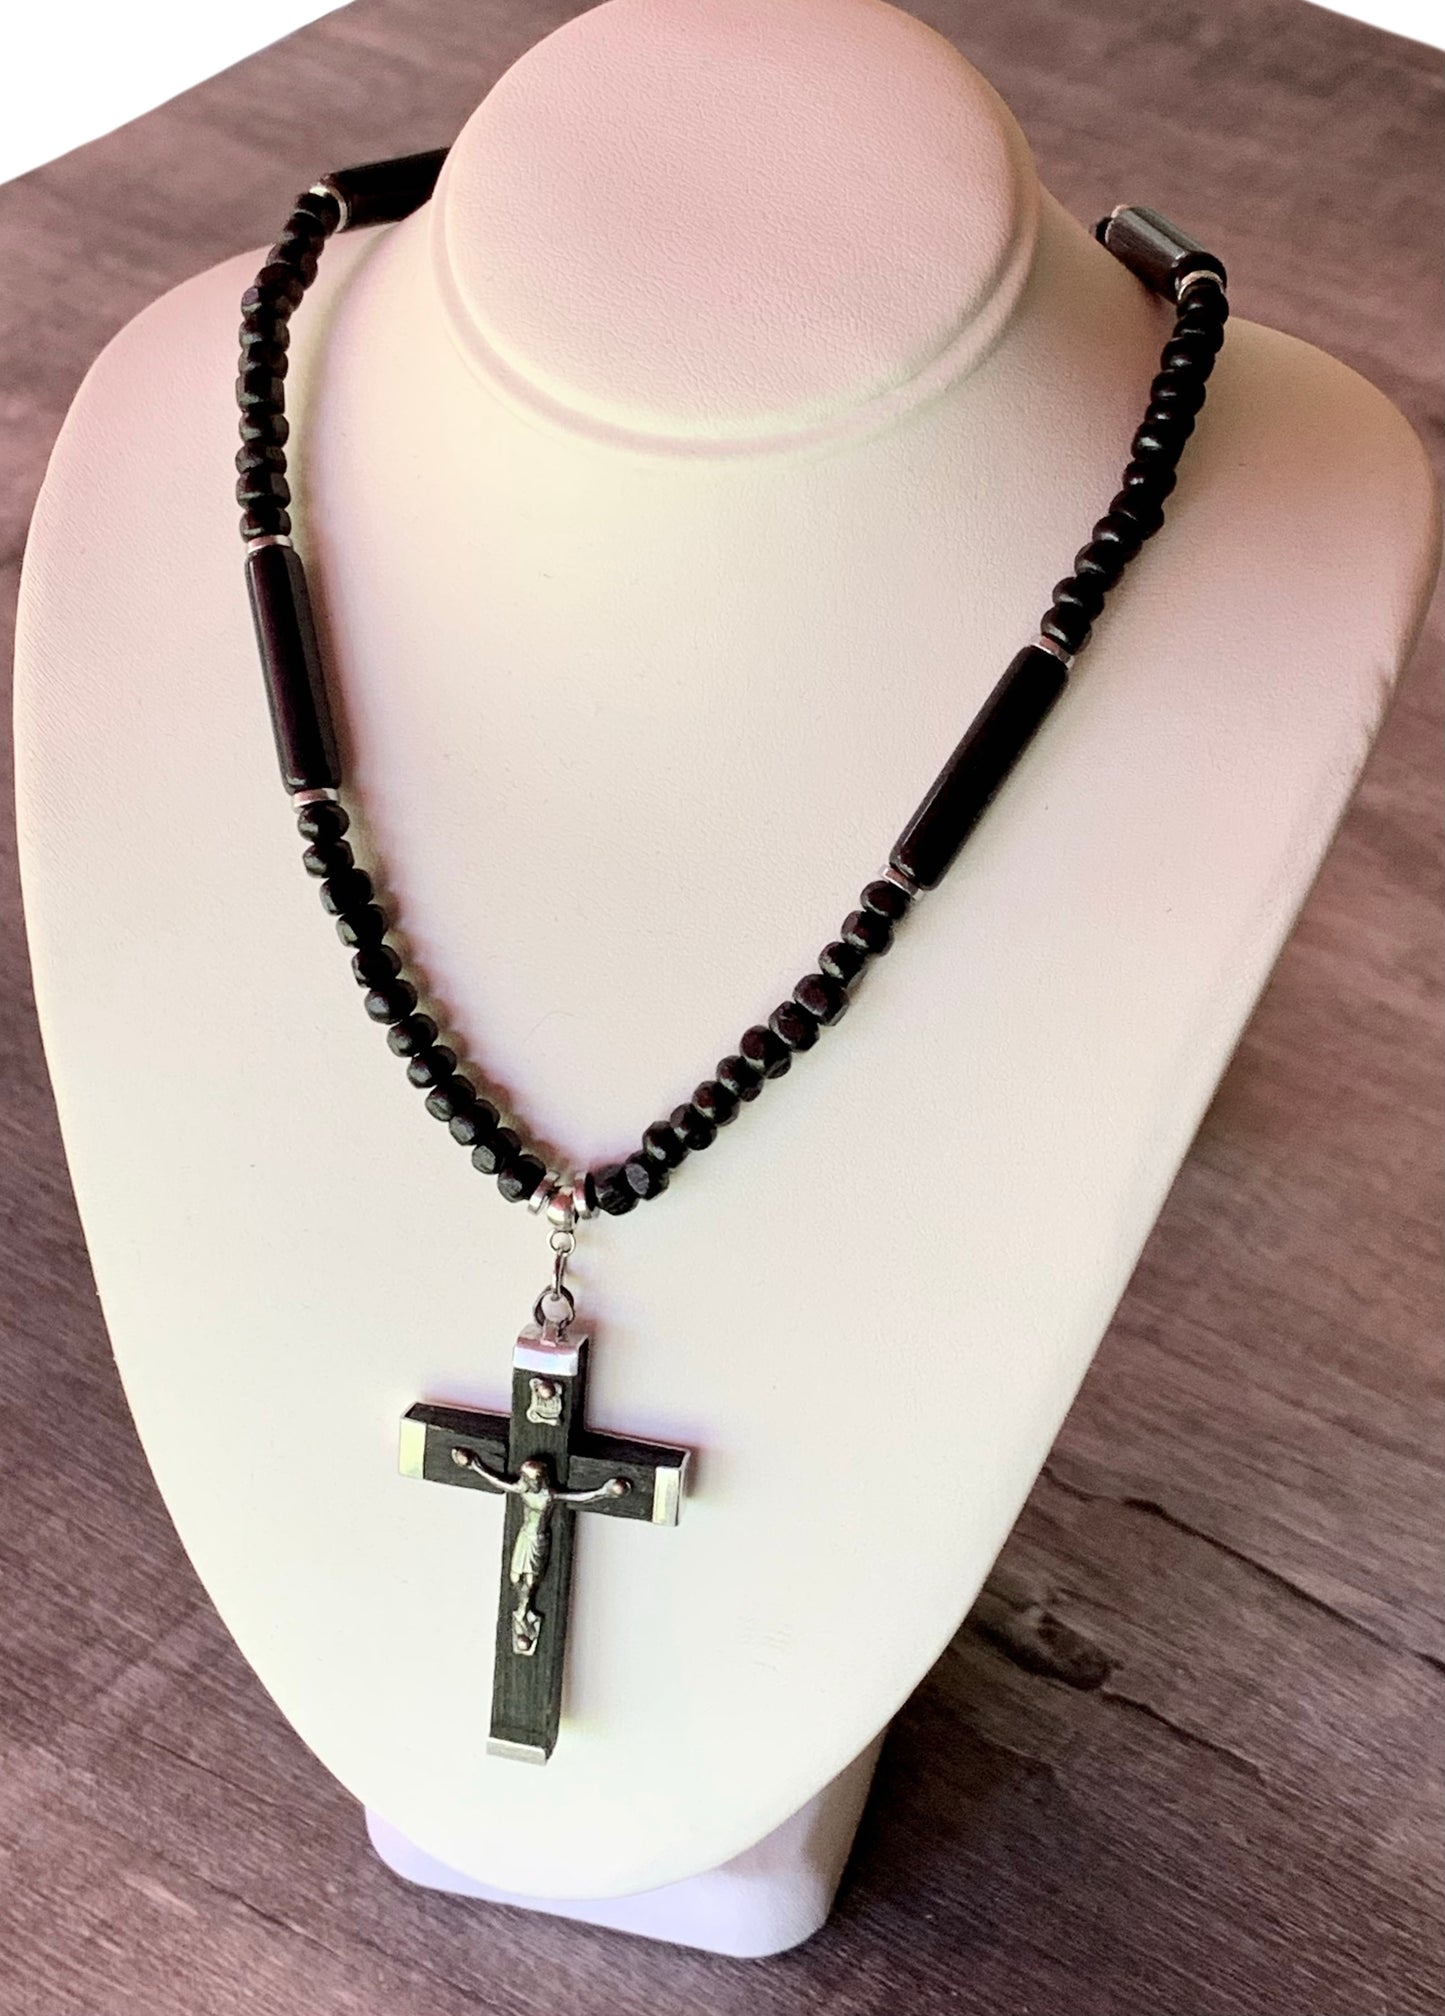 Paulo Handmade Cats Eye, Wood, and Hematite 30" Necklace with a Vintage Cross